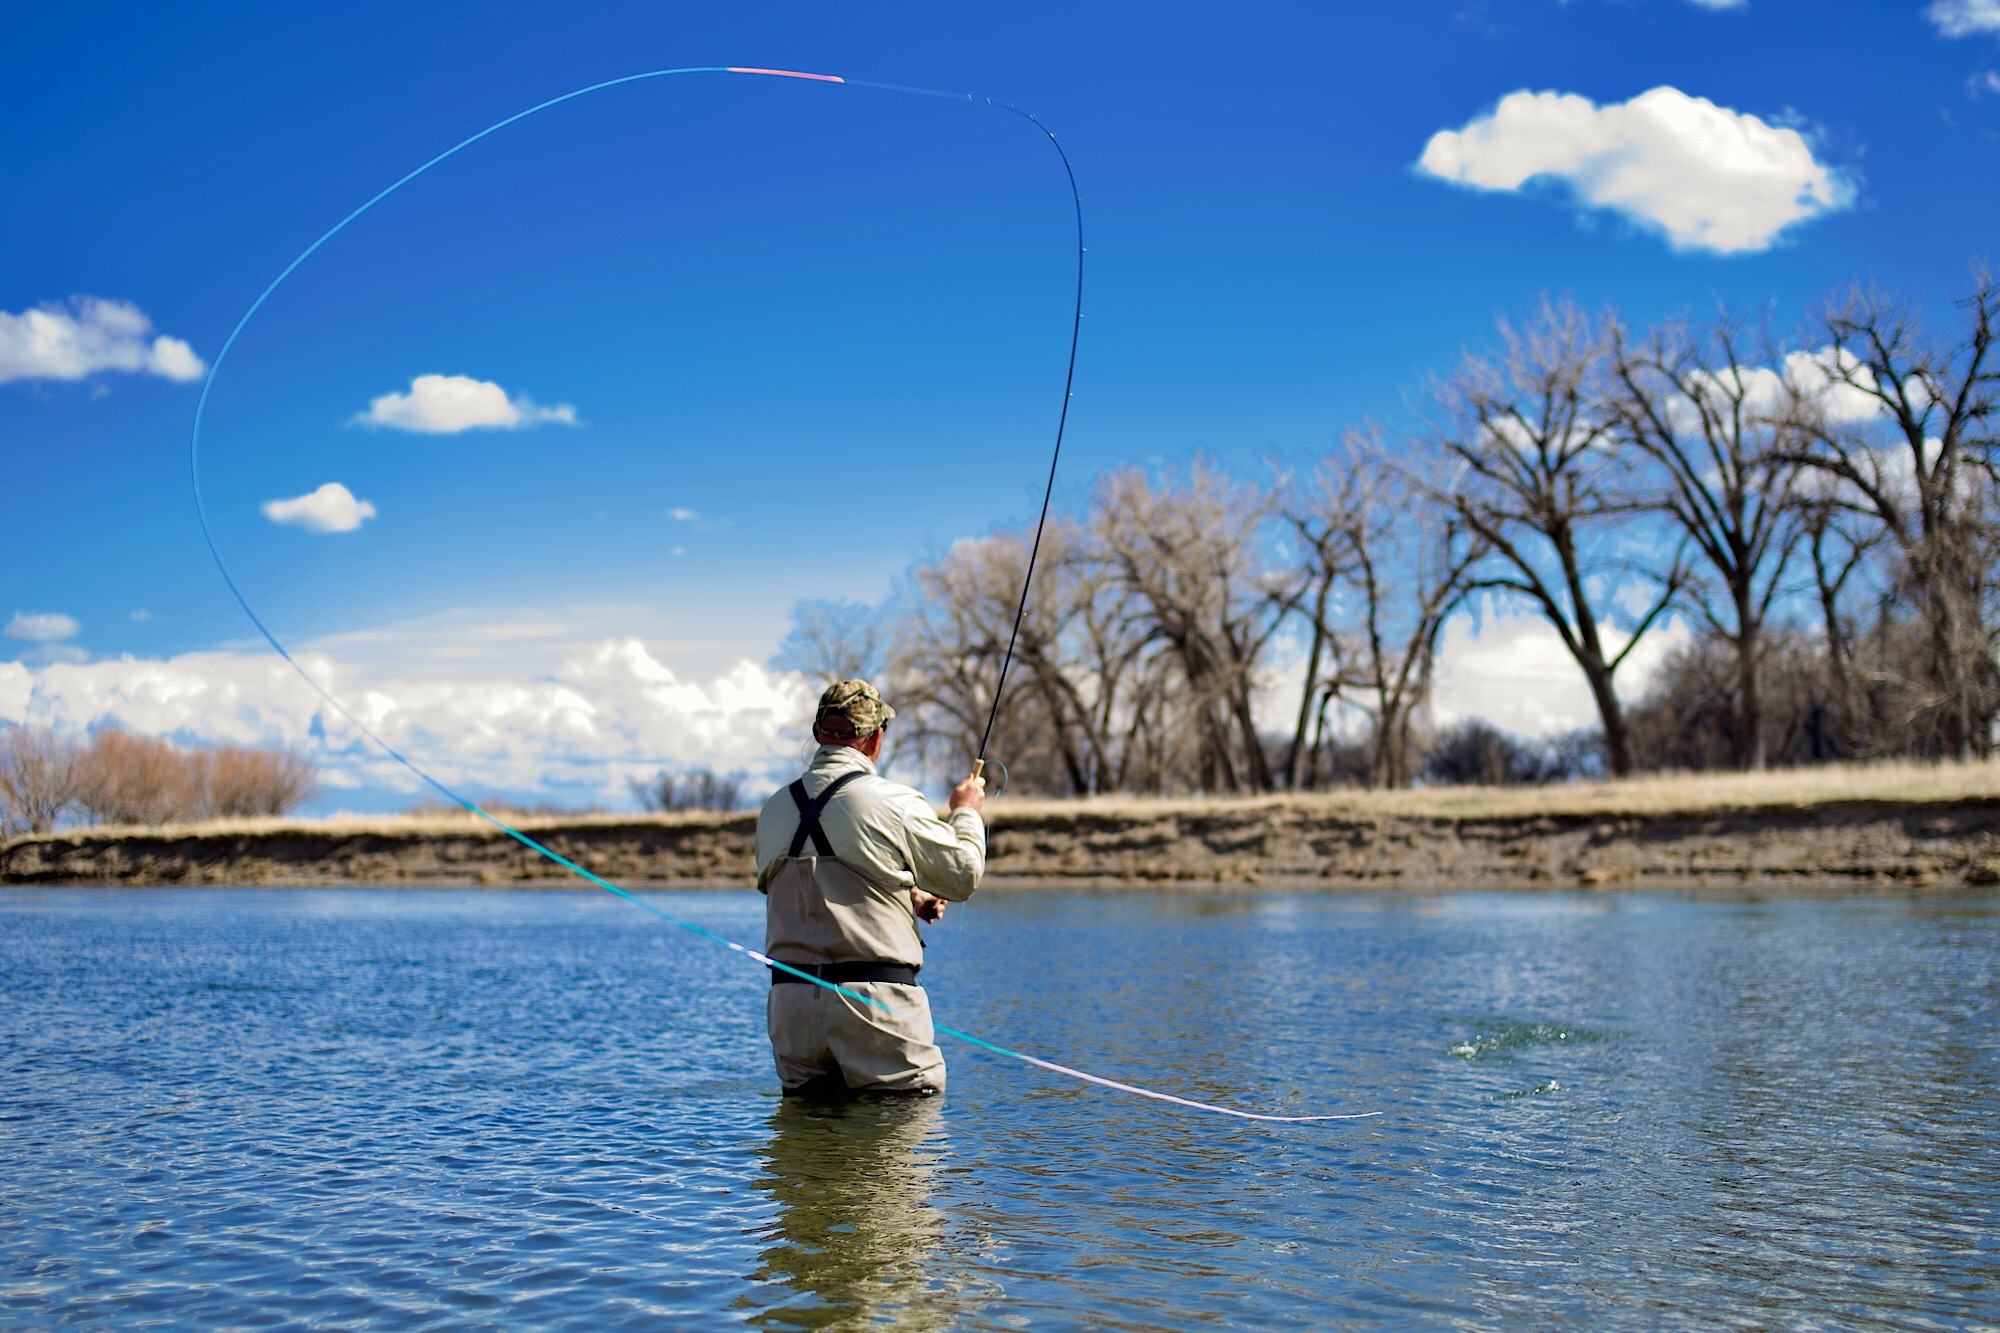 spey fly rod, spey fly rod Suppliers and Manufacturers at